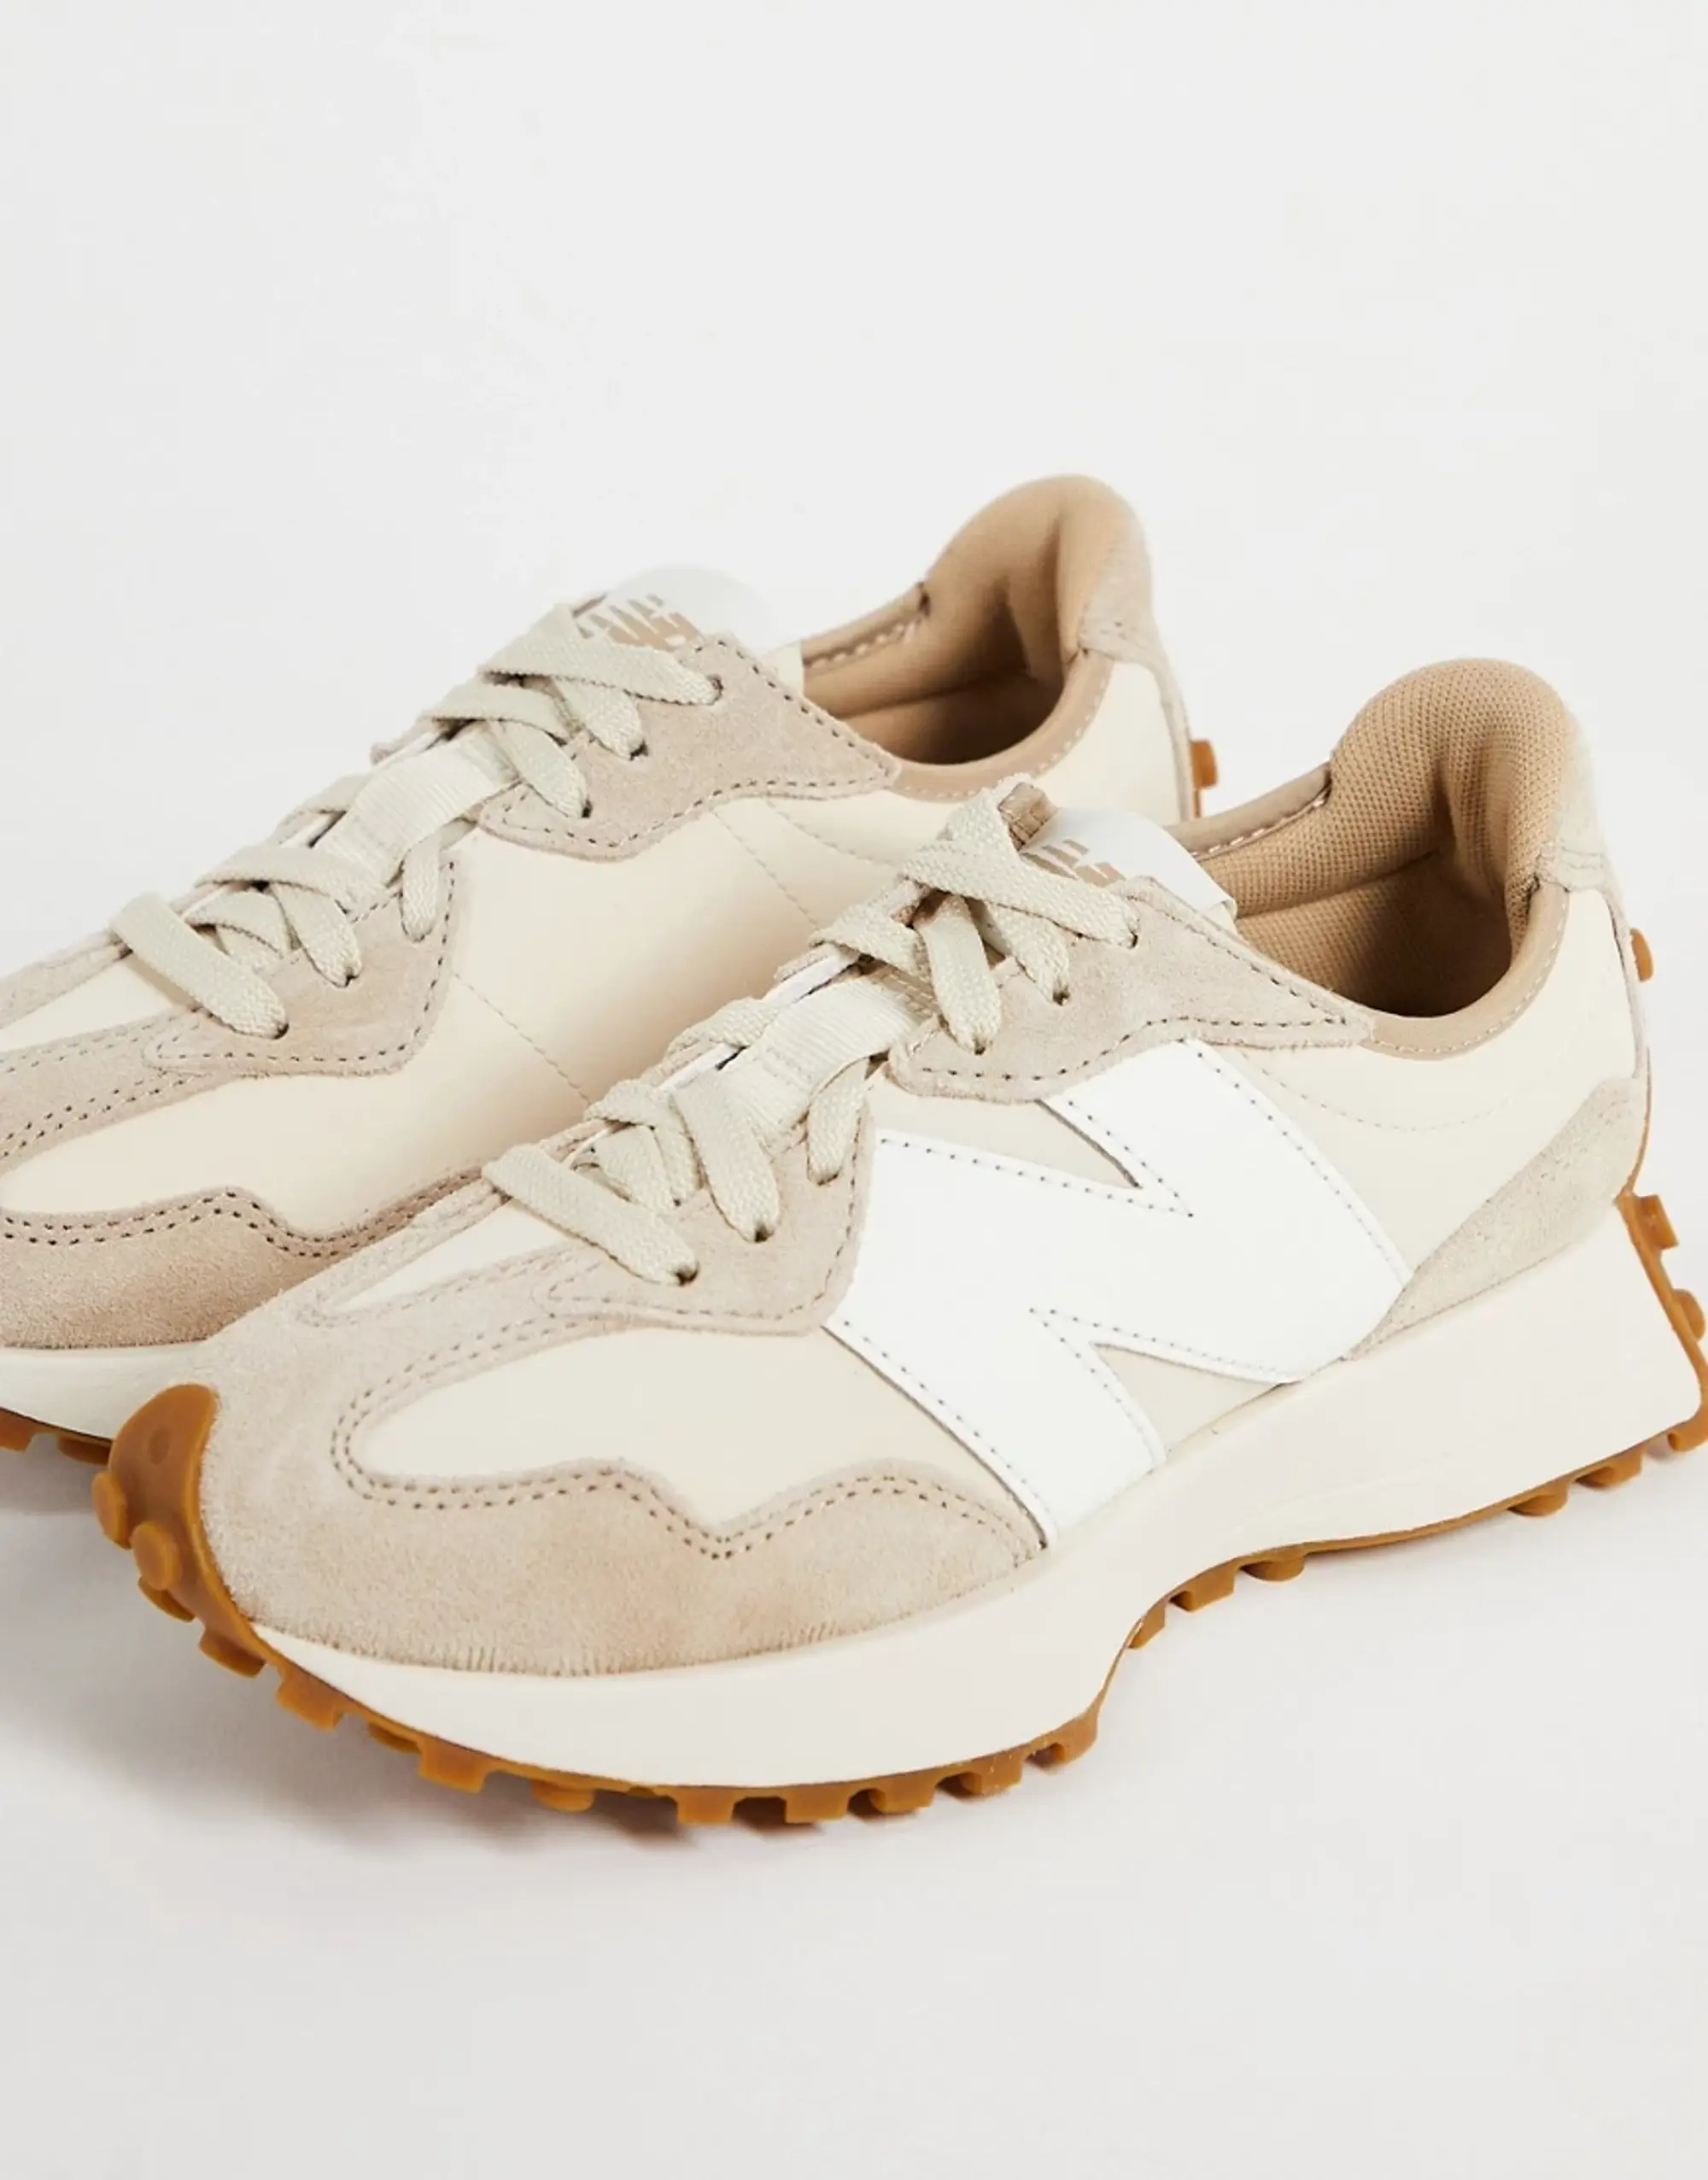 New Balance 327 Trainers In Beige-Neutral